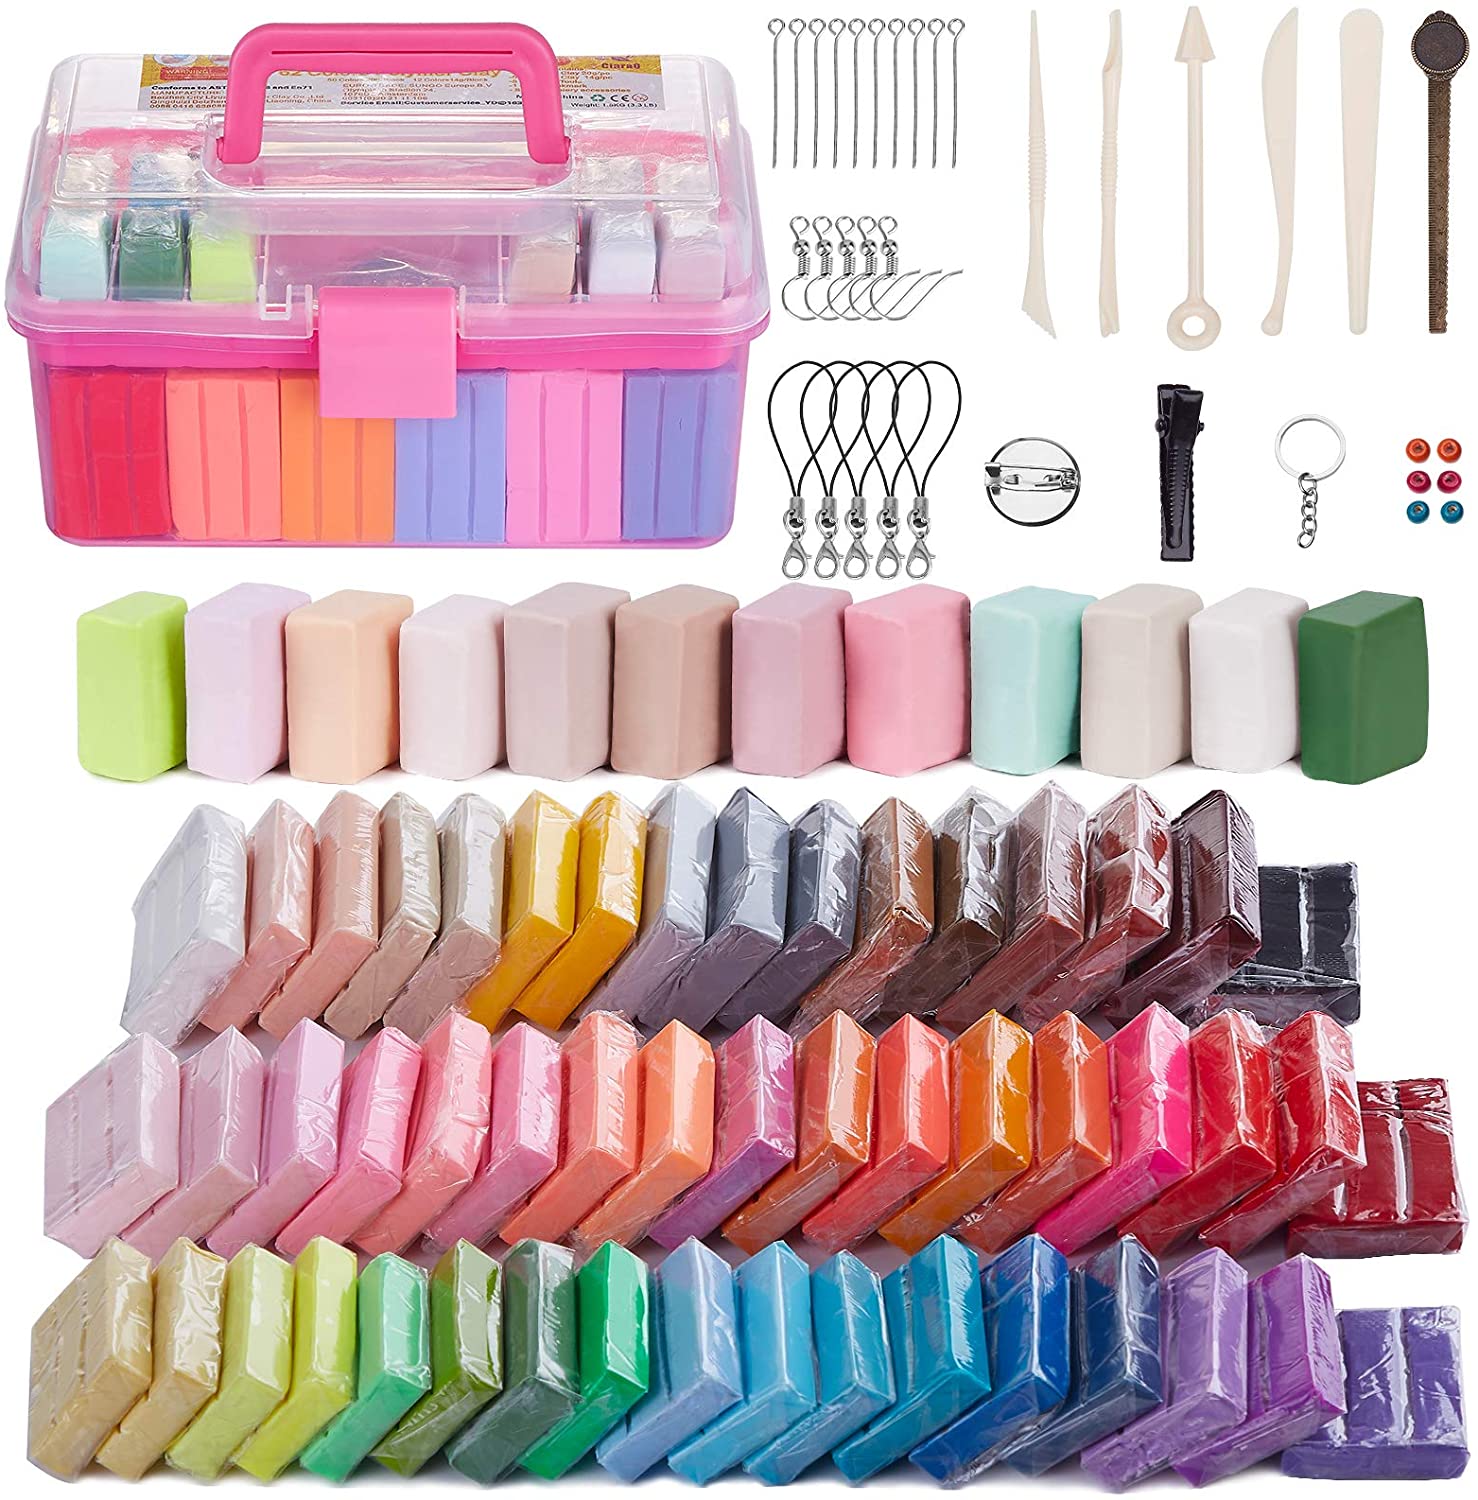 Polymer Clay 32Colors Modeling Baking Clay DIY Craft Clay Set w